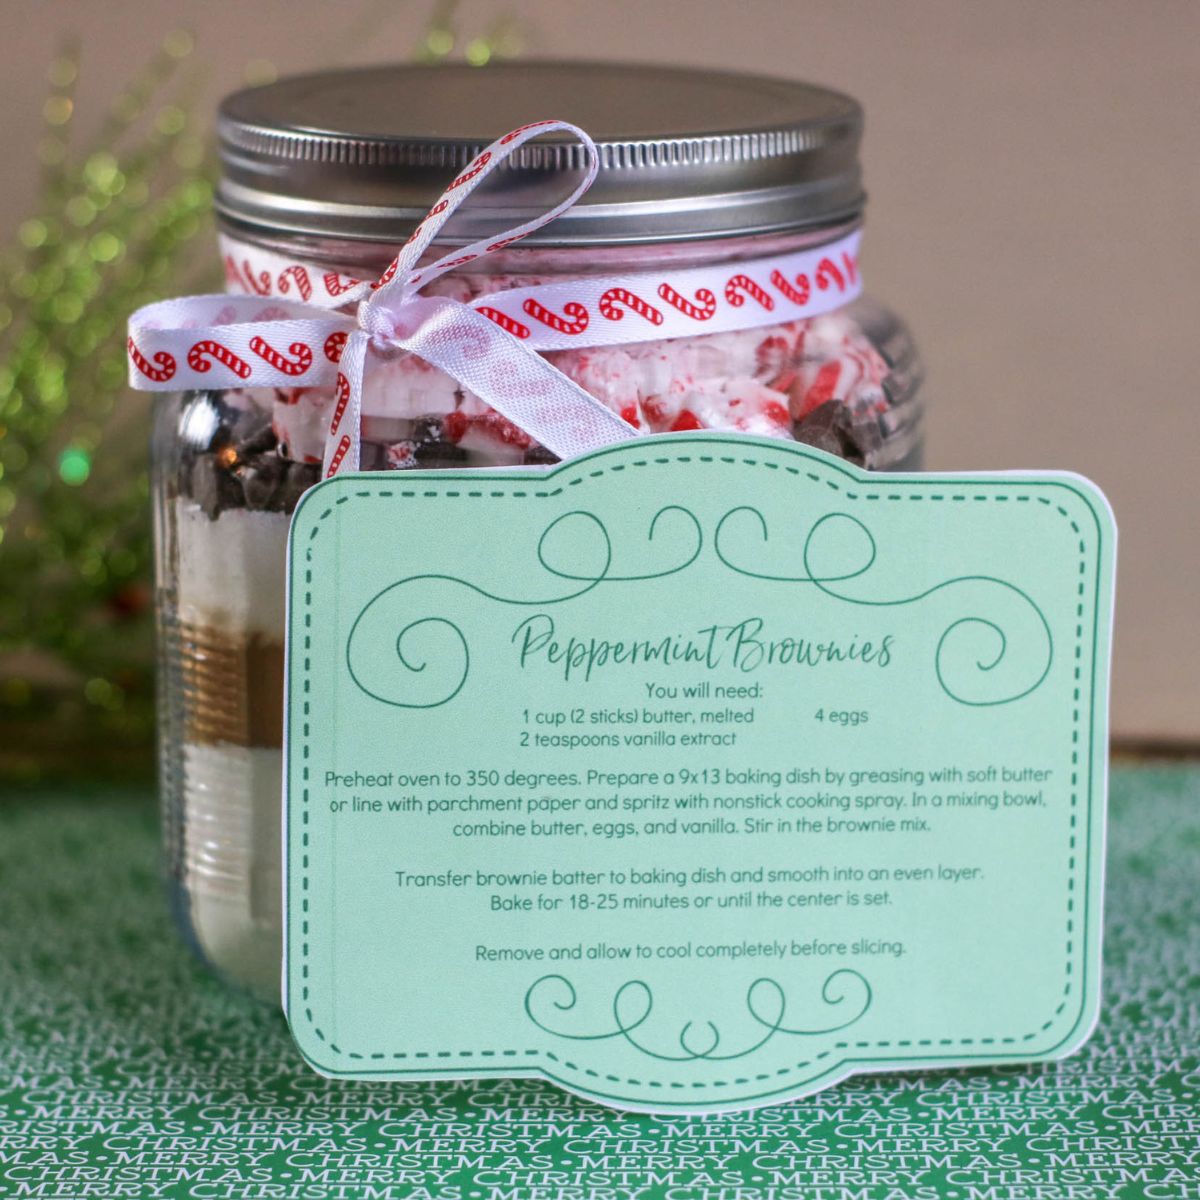 Peppermint brownie mix in a jar with printable label.